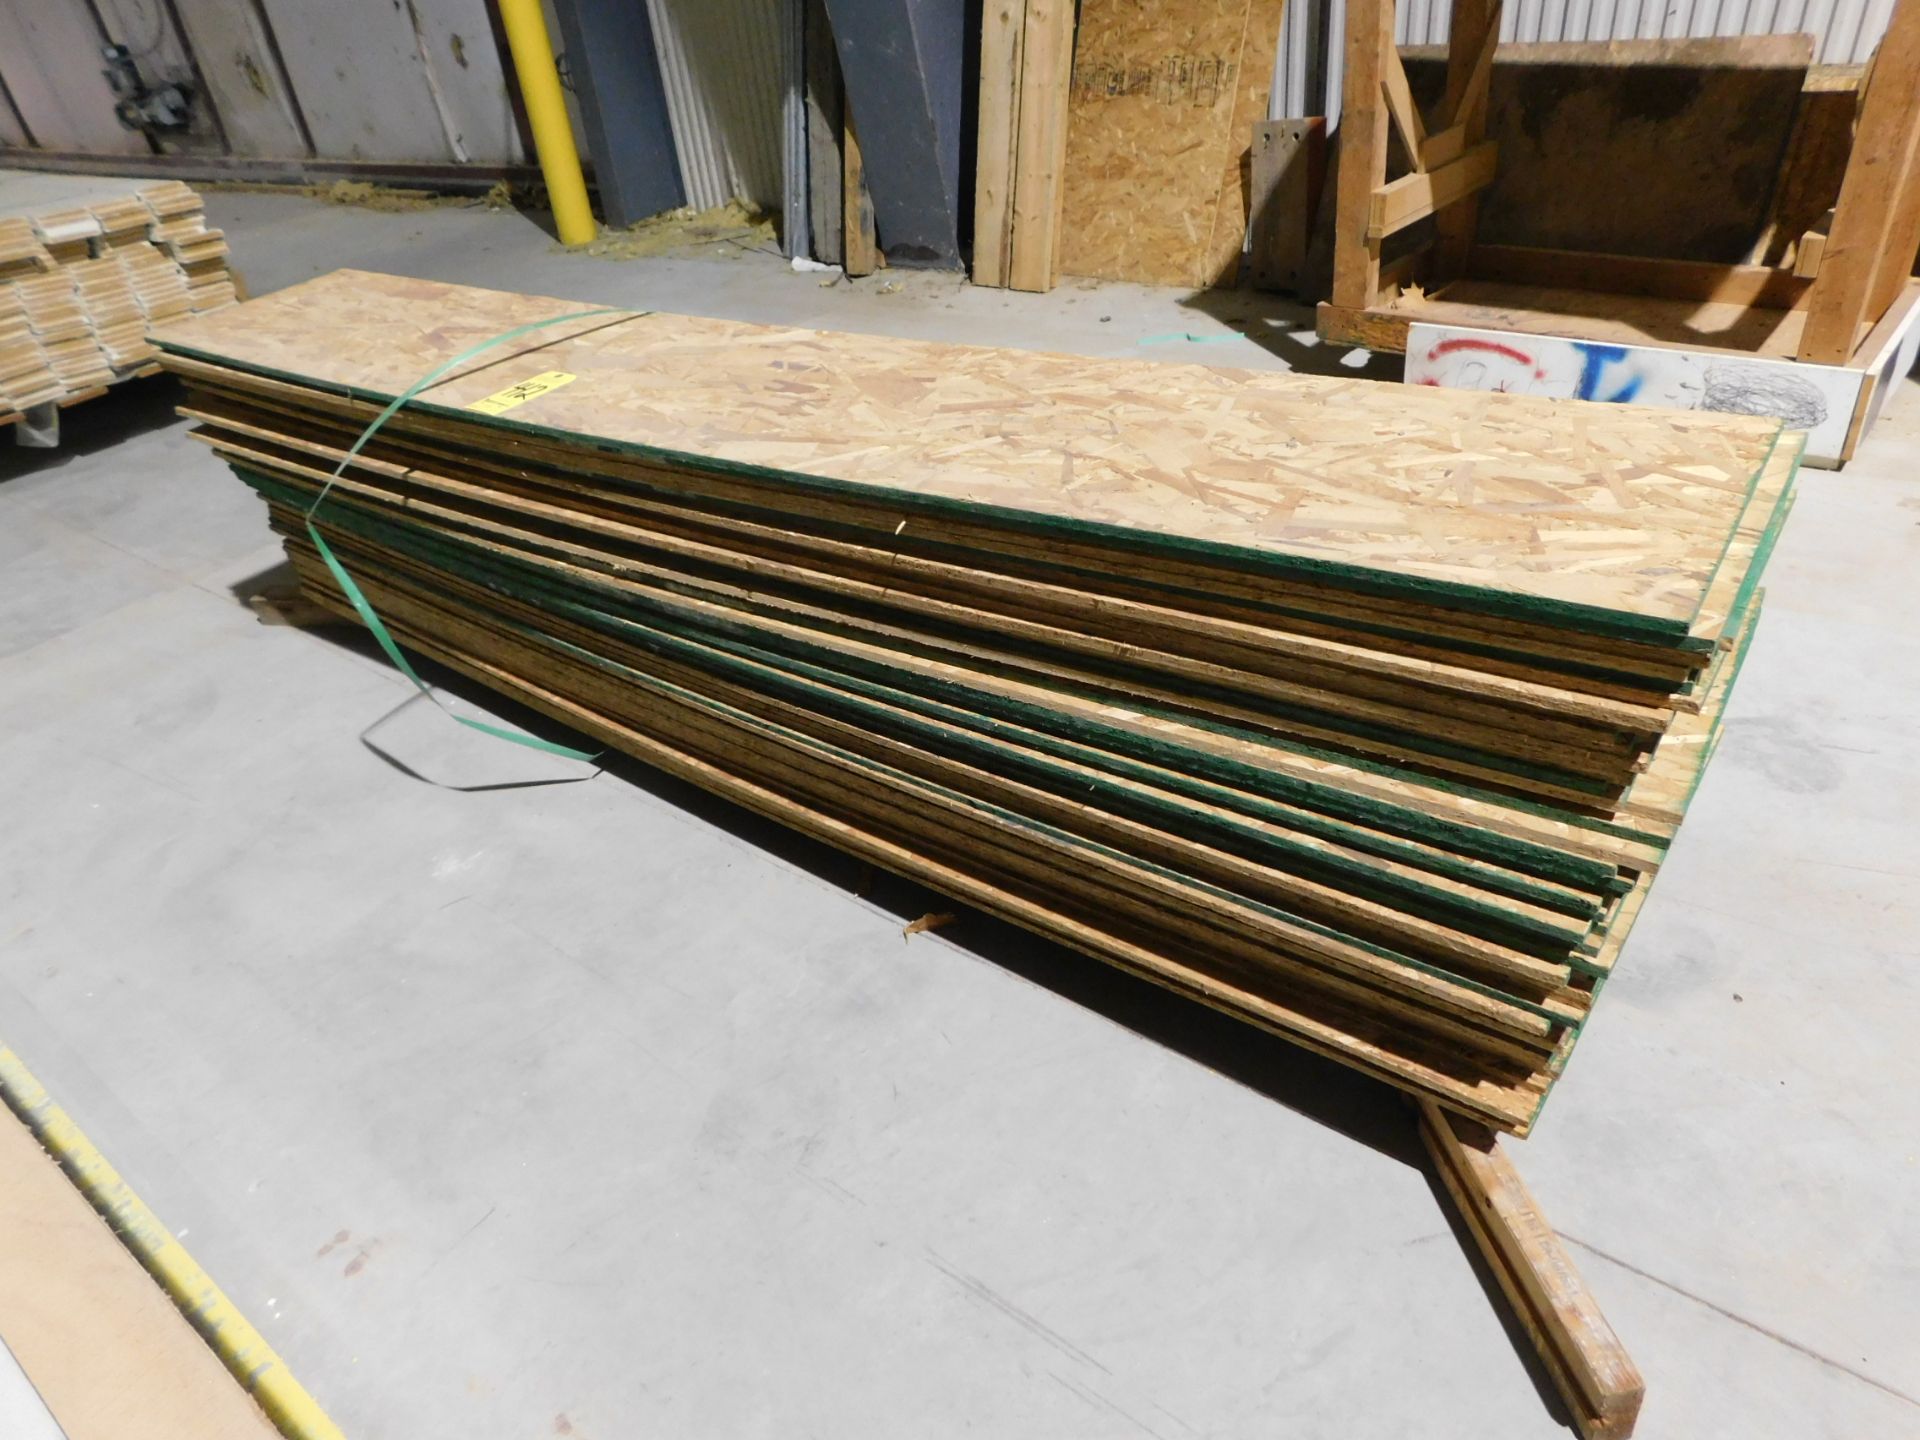 16" X 8' X 1/2" Particle Board Sheets, Approx. 50 Pieces